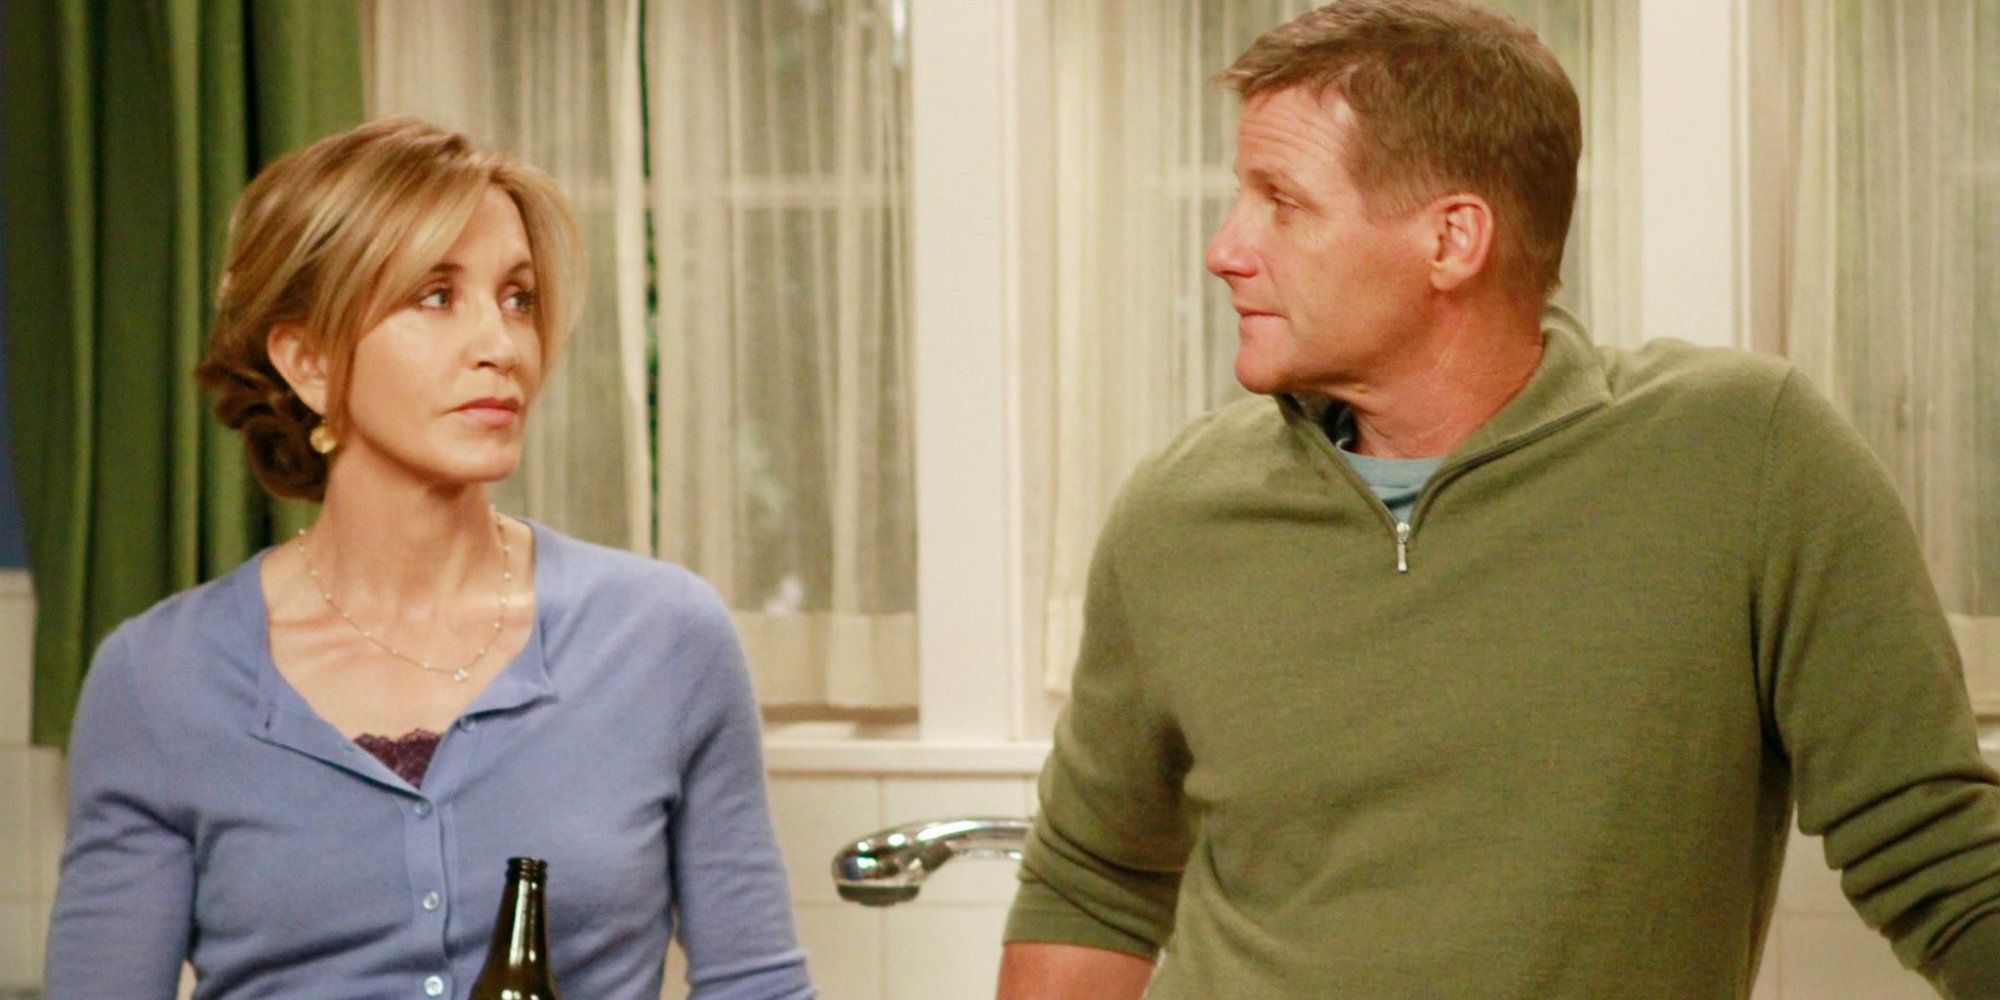 Lynette holding a beer bottle and talking to Tom on Desperate Housewives